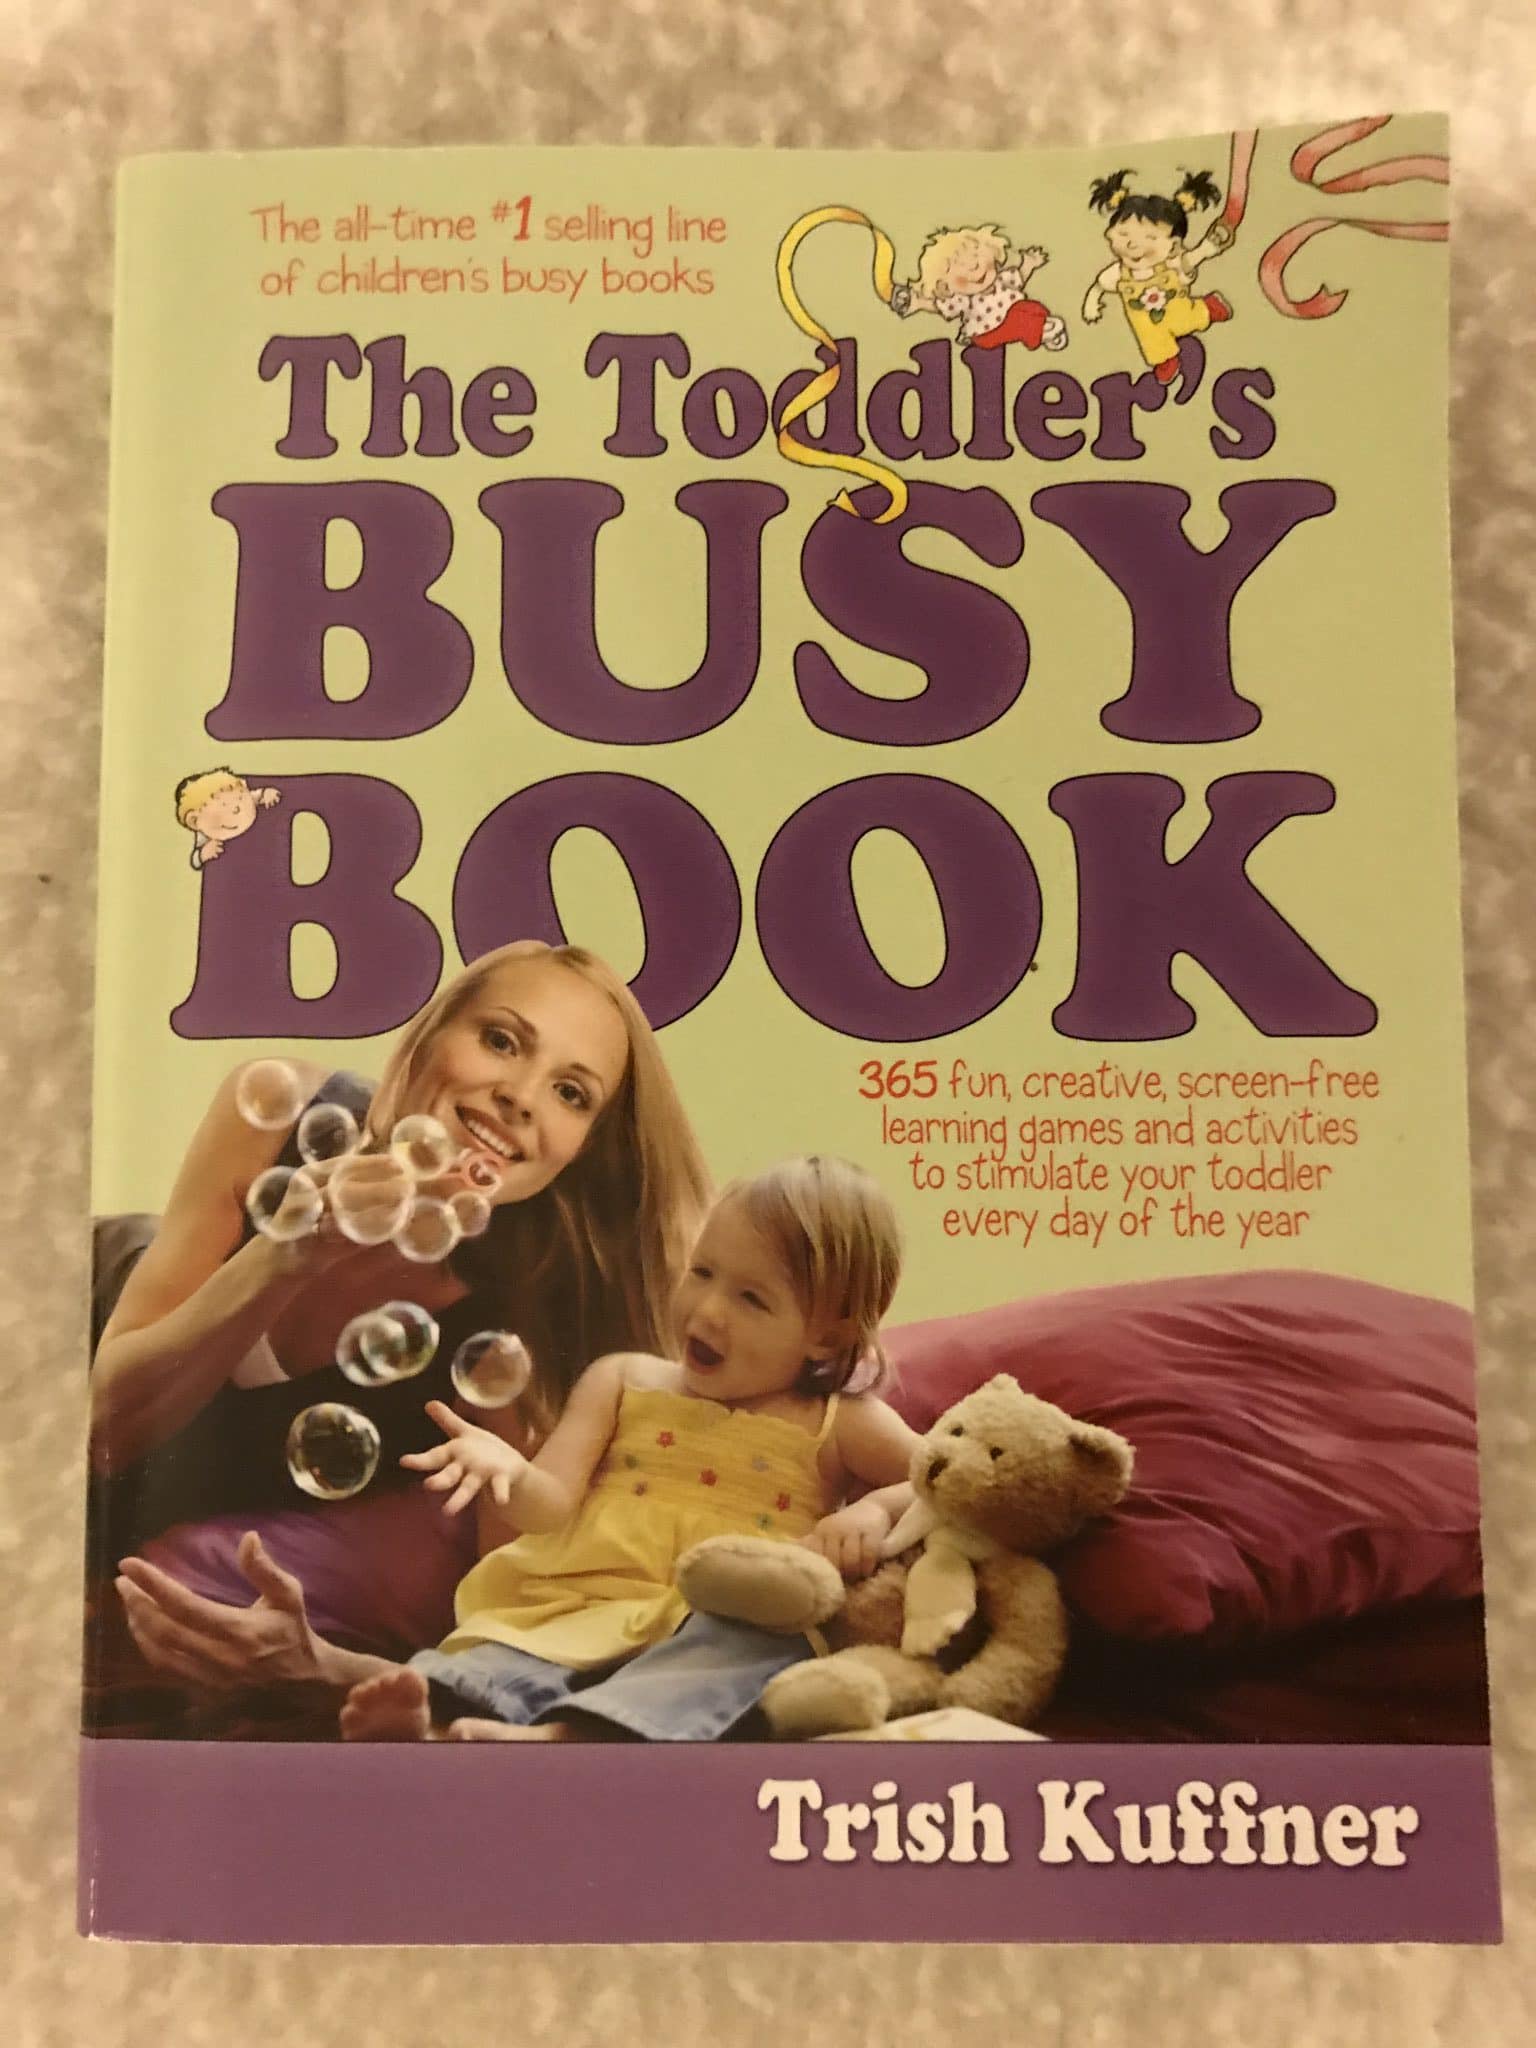 Review - The Toddler's Busy Book - Part 1 - A Whimsy Life